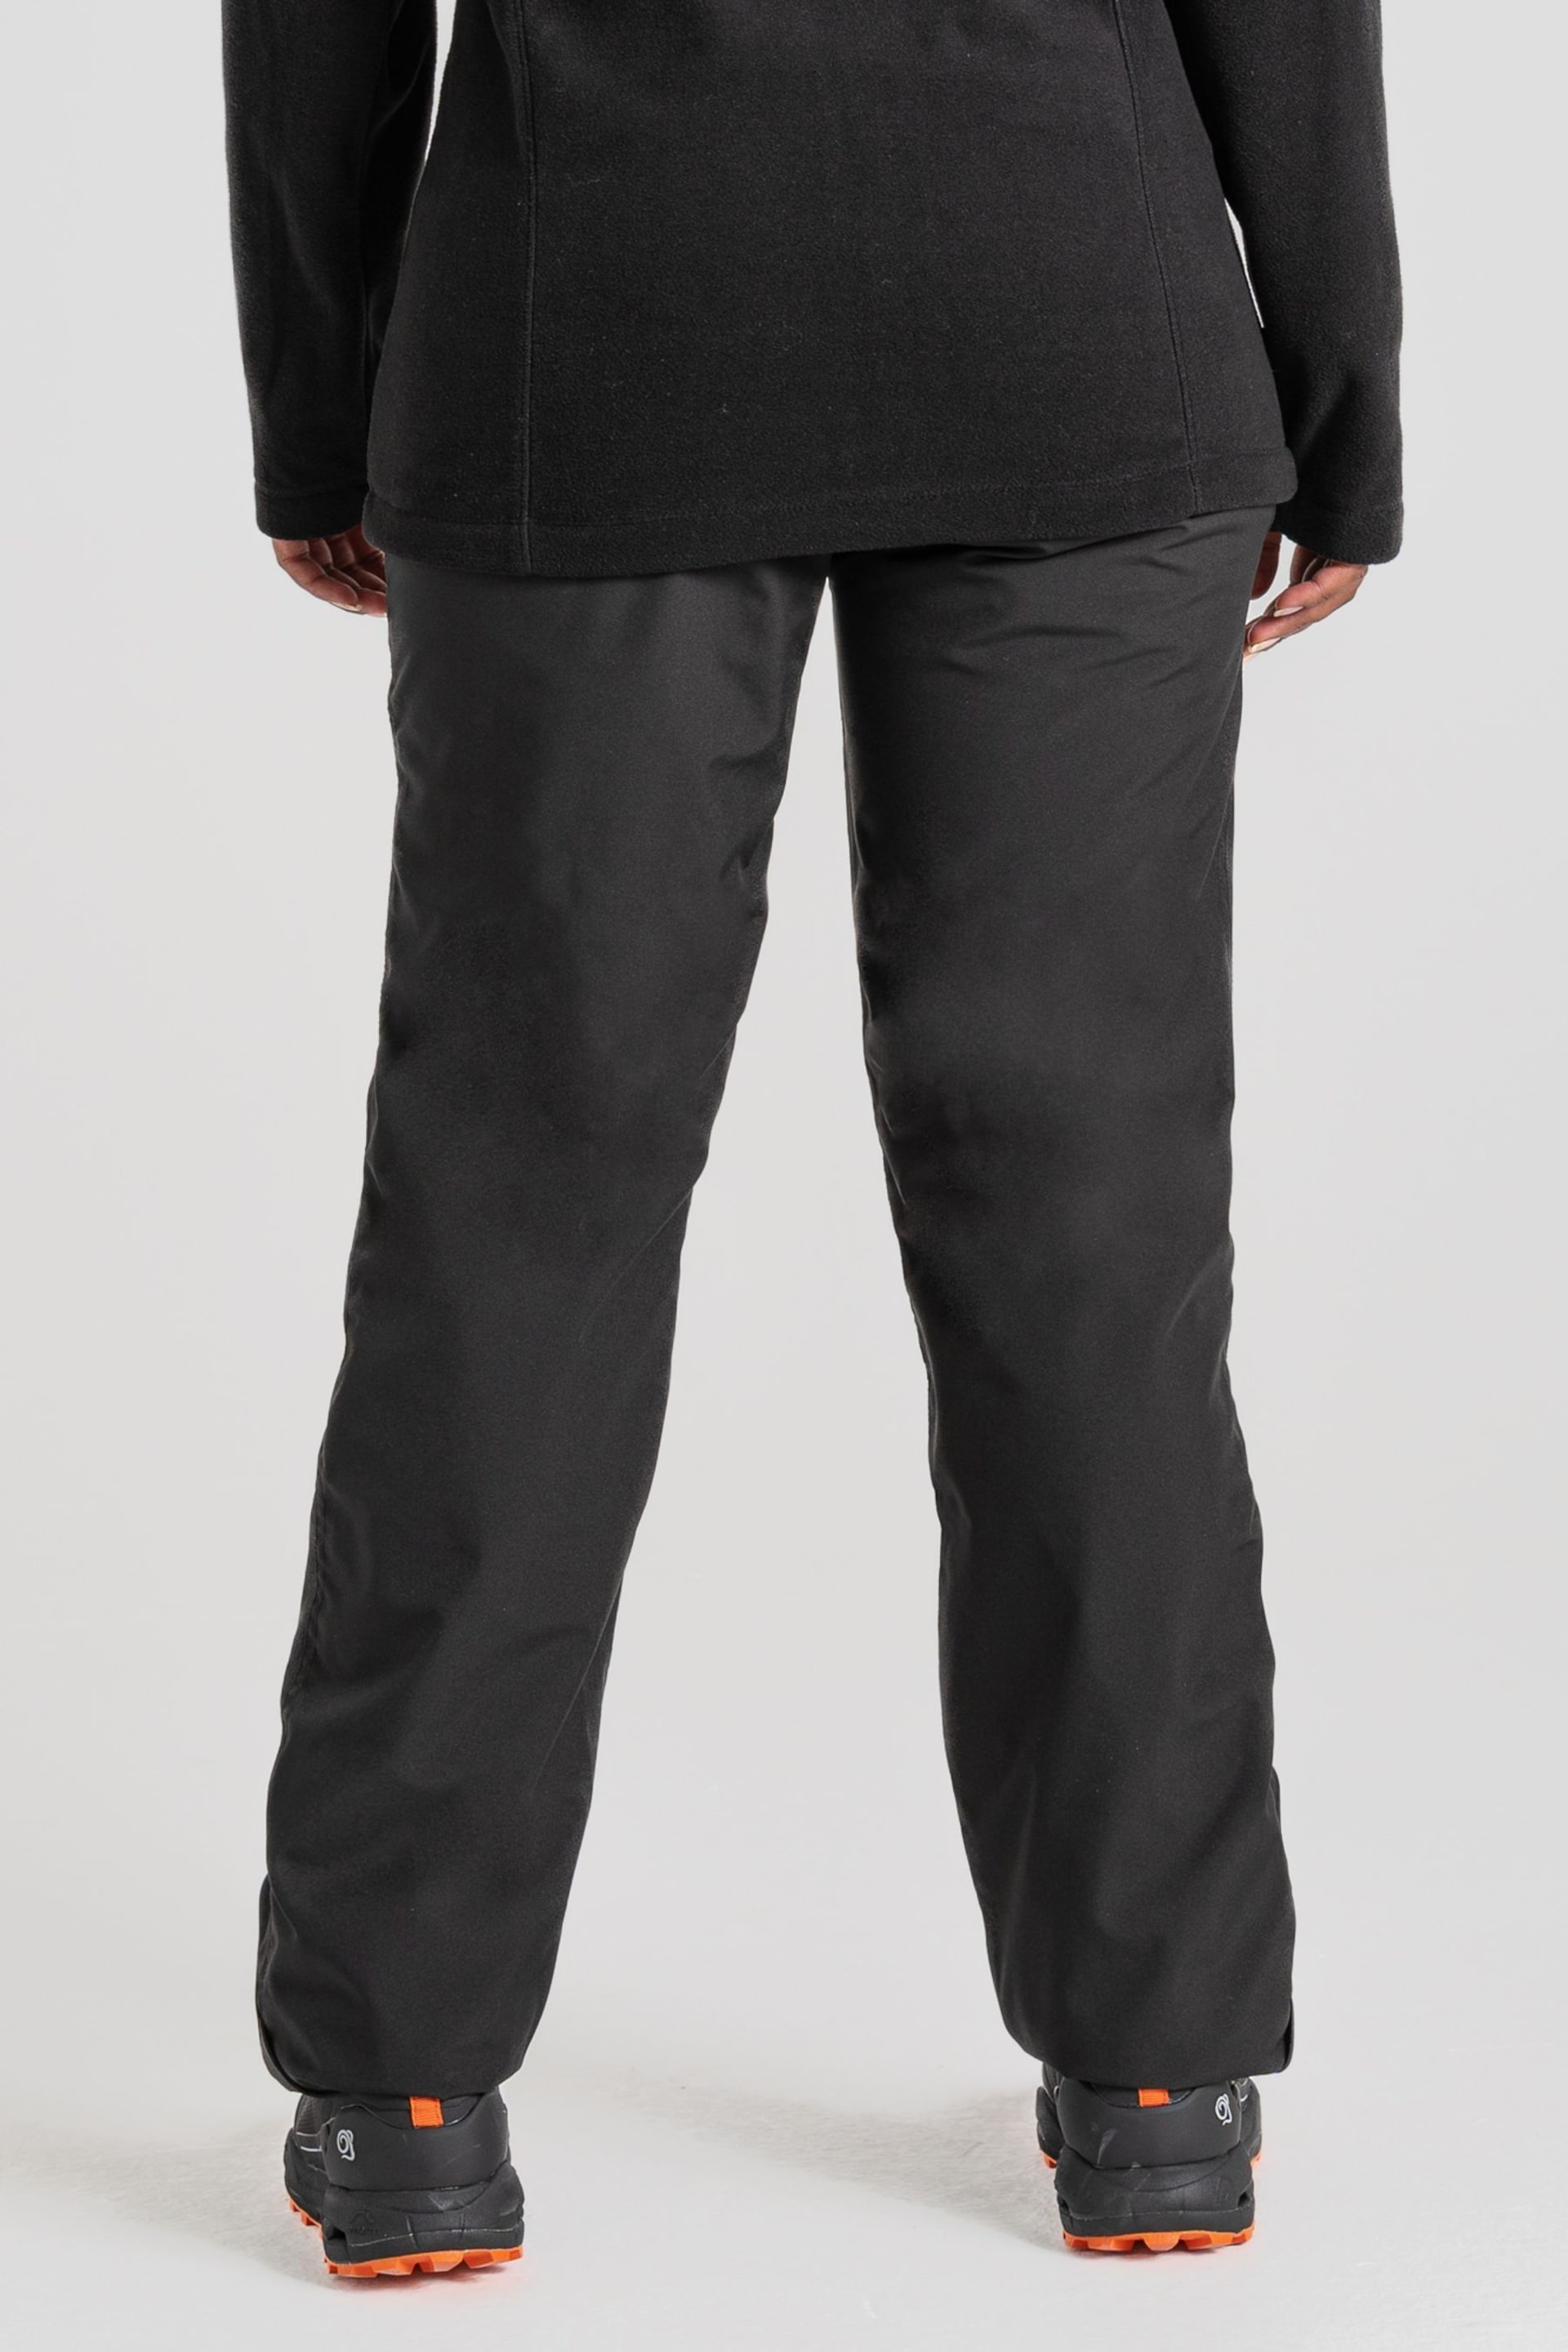 Craghoppers Aysgarth Black Thermo Trousers - Image 2 of 6